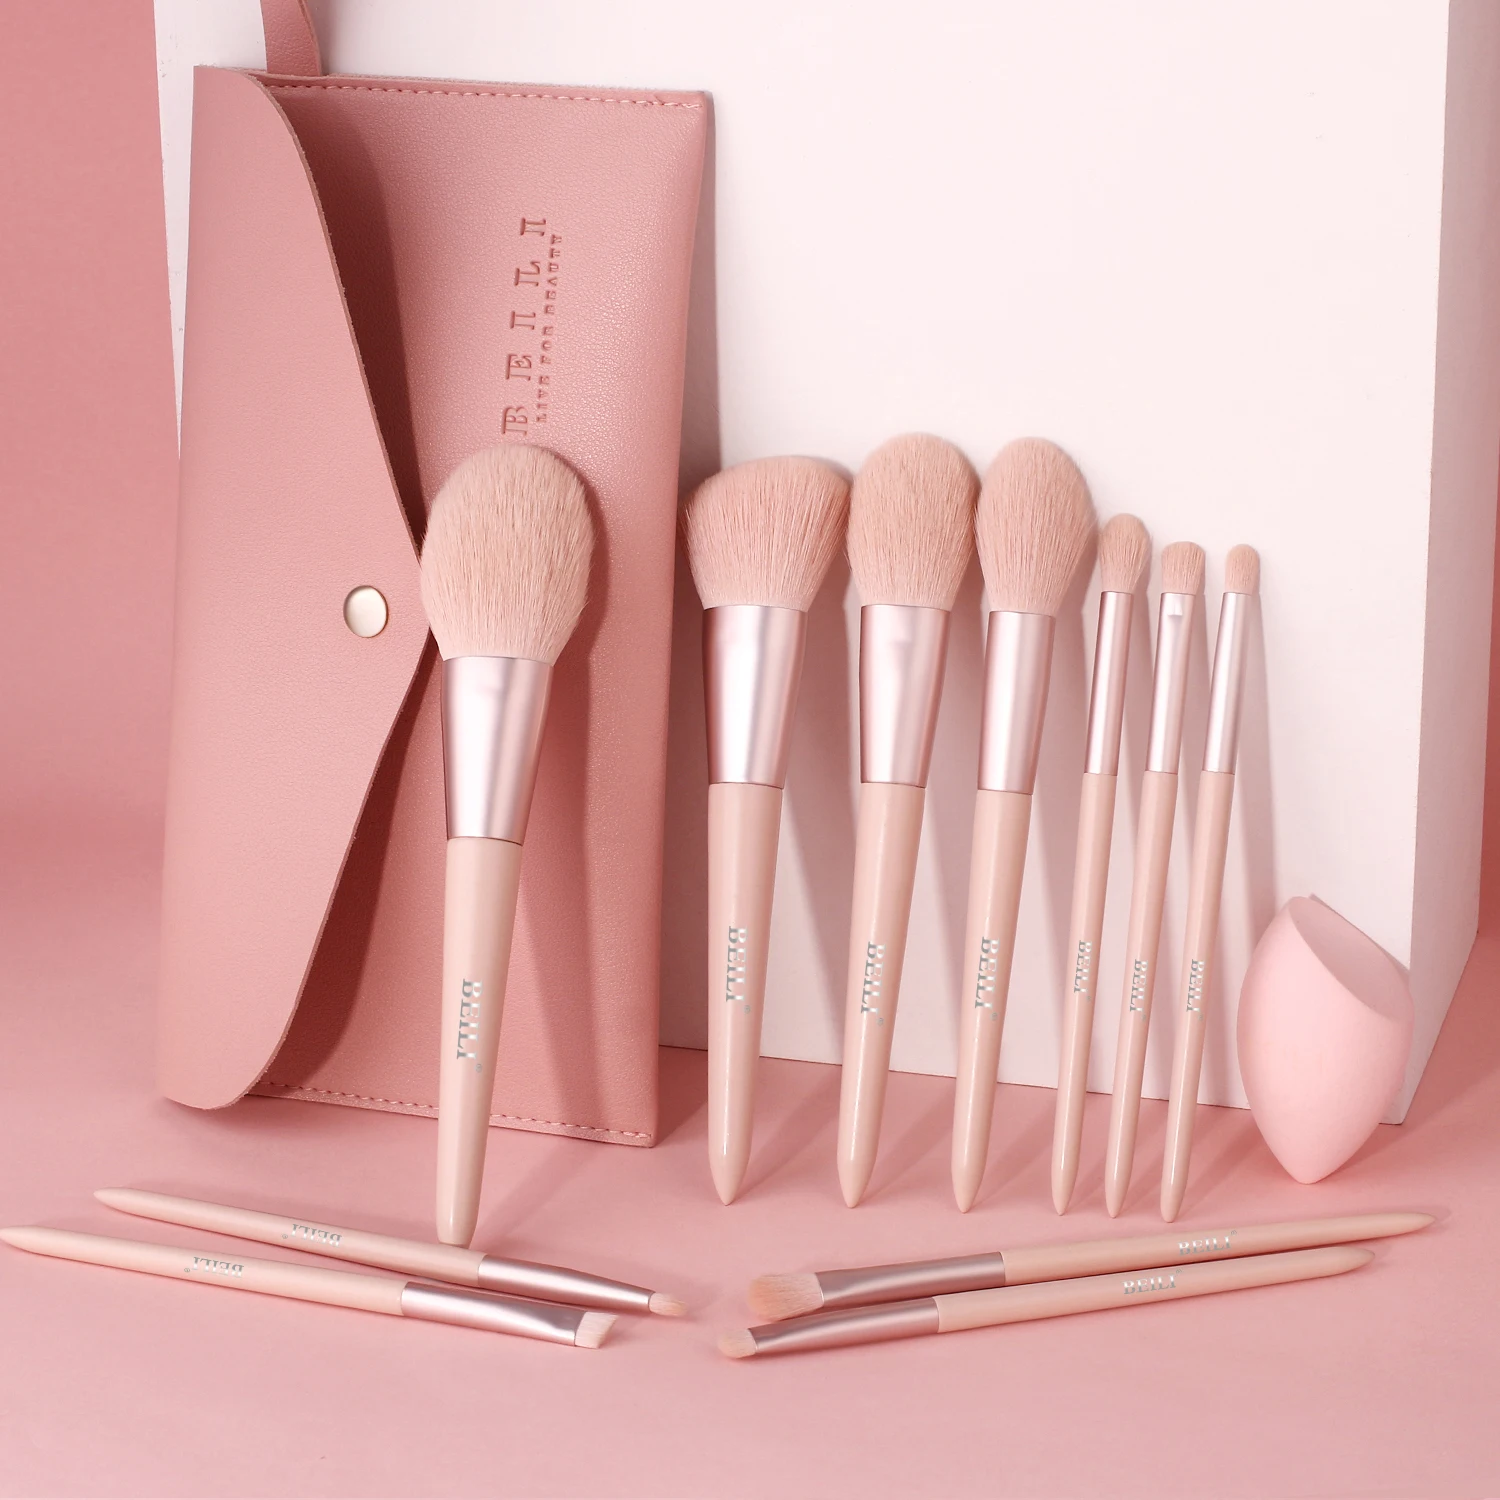 

BEILI Private Label 11 Pcs Pink Professional Makeup Brushes Eyeshadow Foundation Powder Cosmetic Tools Make Up Brush With Bag